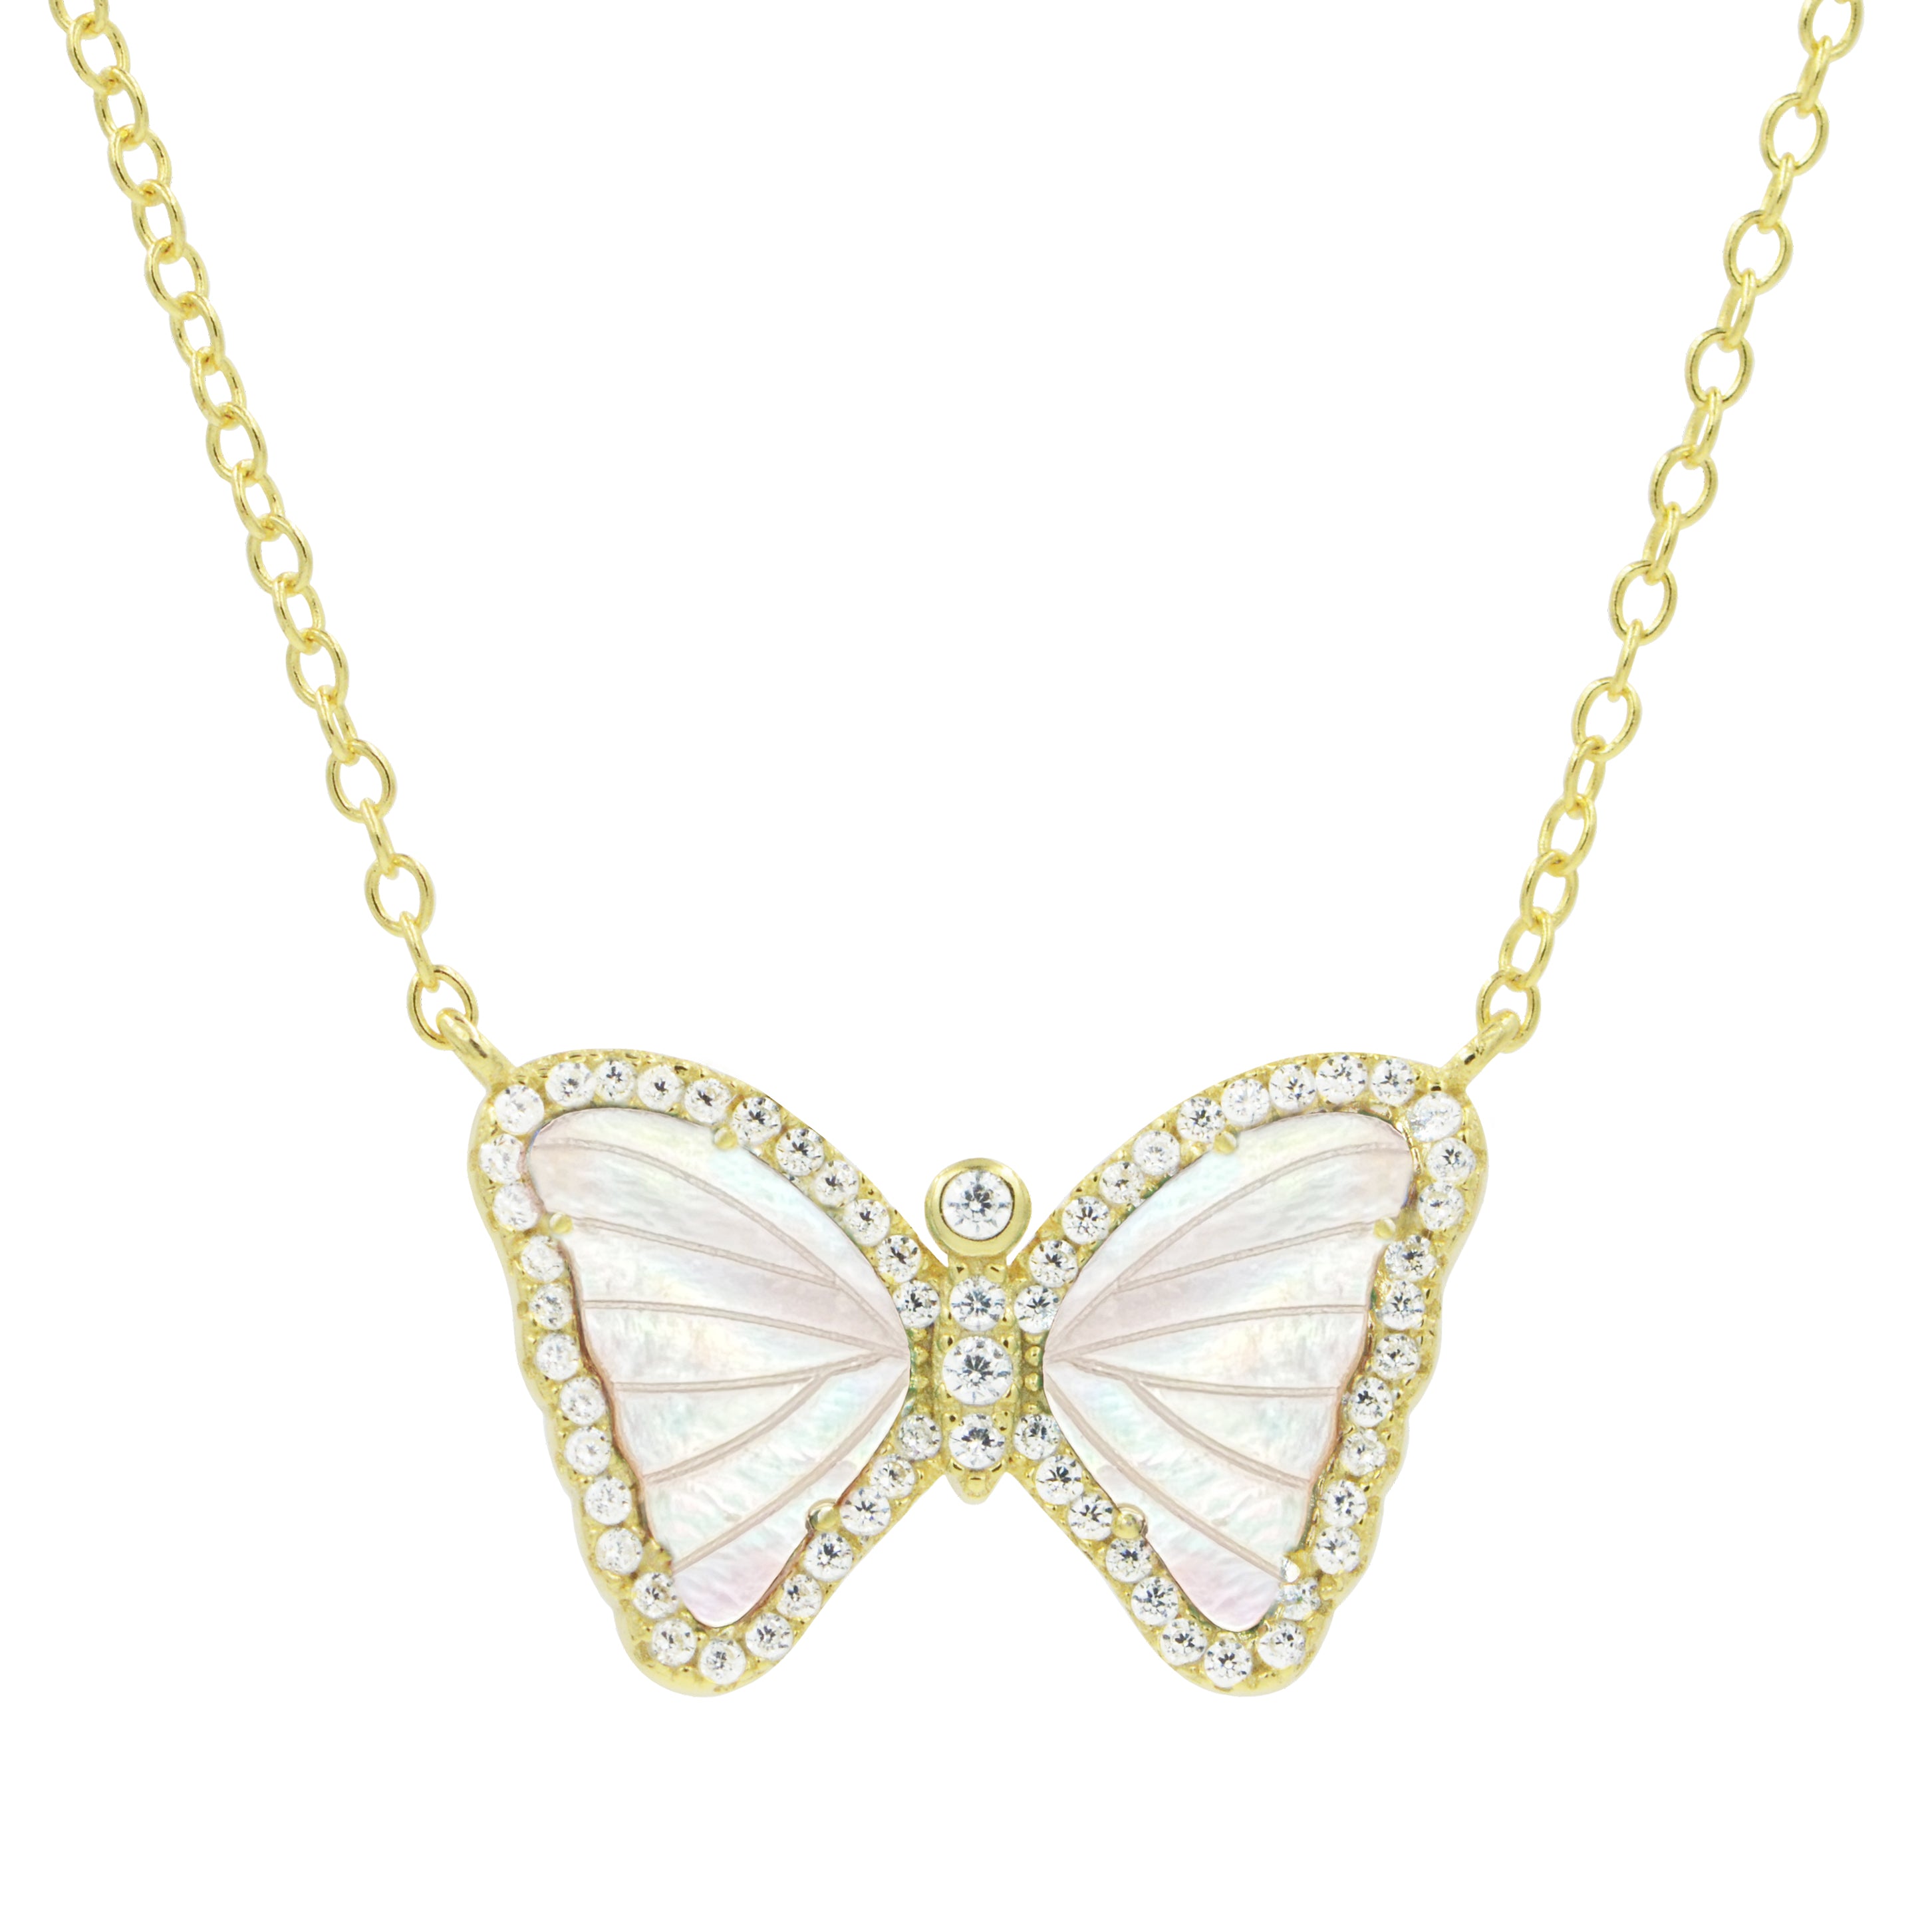 LeCalla - Buy 925 Sterling Silver 18K Rose Gold-Plated Mother-of-Pearl  Butterfly Pendant Necklace for Women Teen